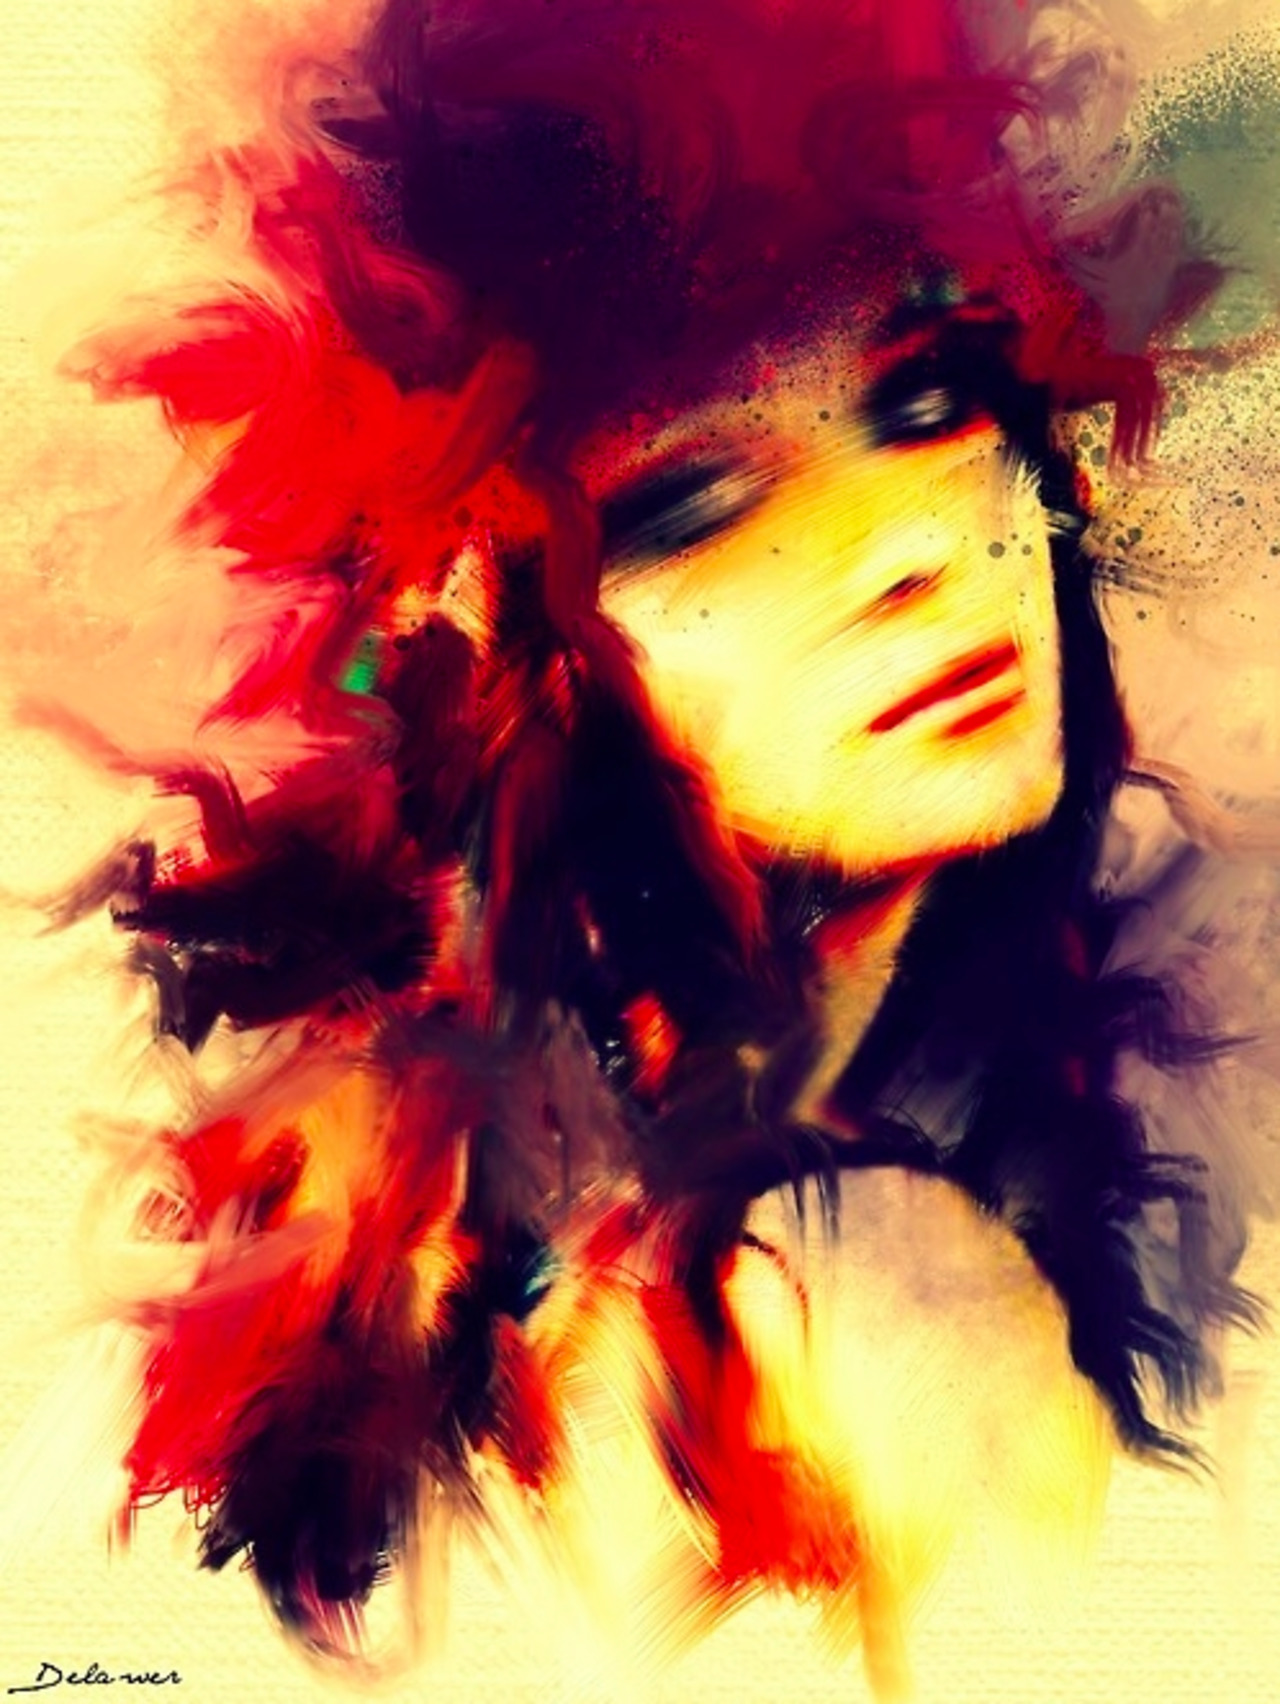 #Painting by Delawer Omar #art #portrait 
http://novelmasters.org/wp-content/oqe… http://t.co/io76OjT9kf